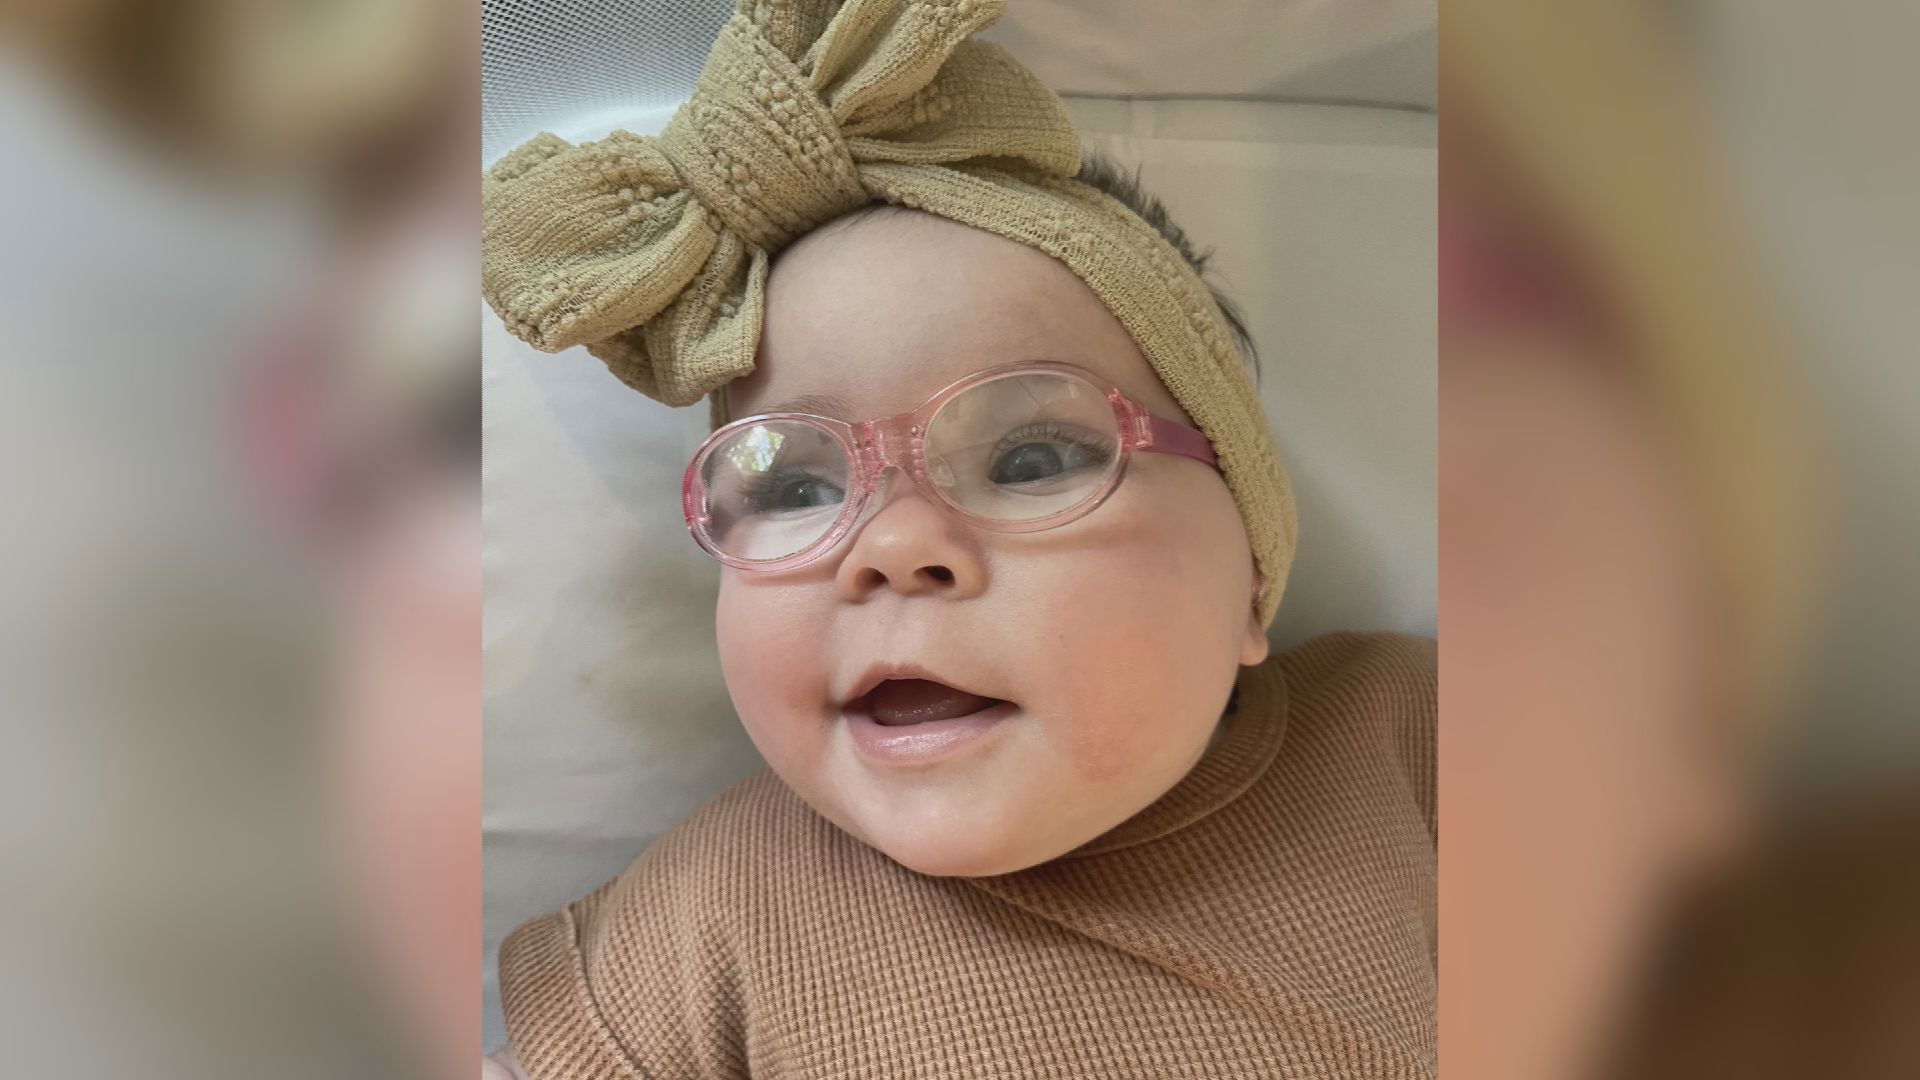 Two Grand Rapids parents are making it their mission to keep their daughter healthy with a fundraiser to help cure PDCD.